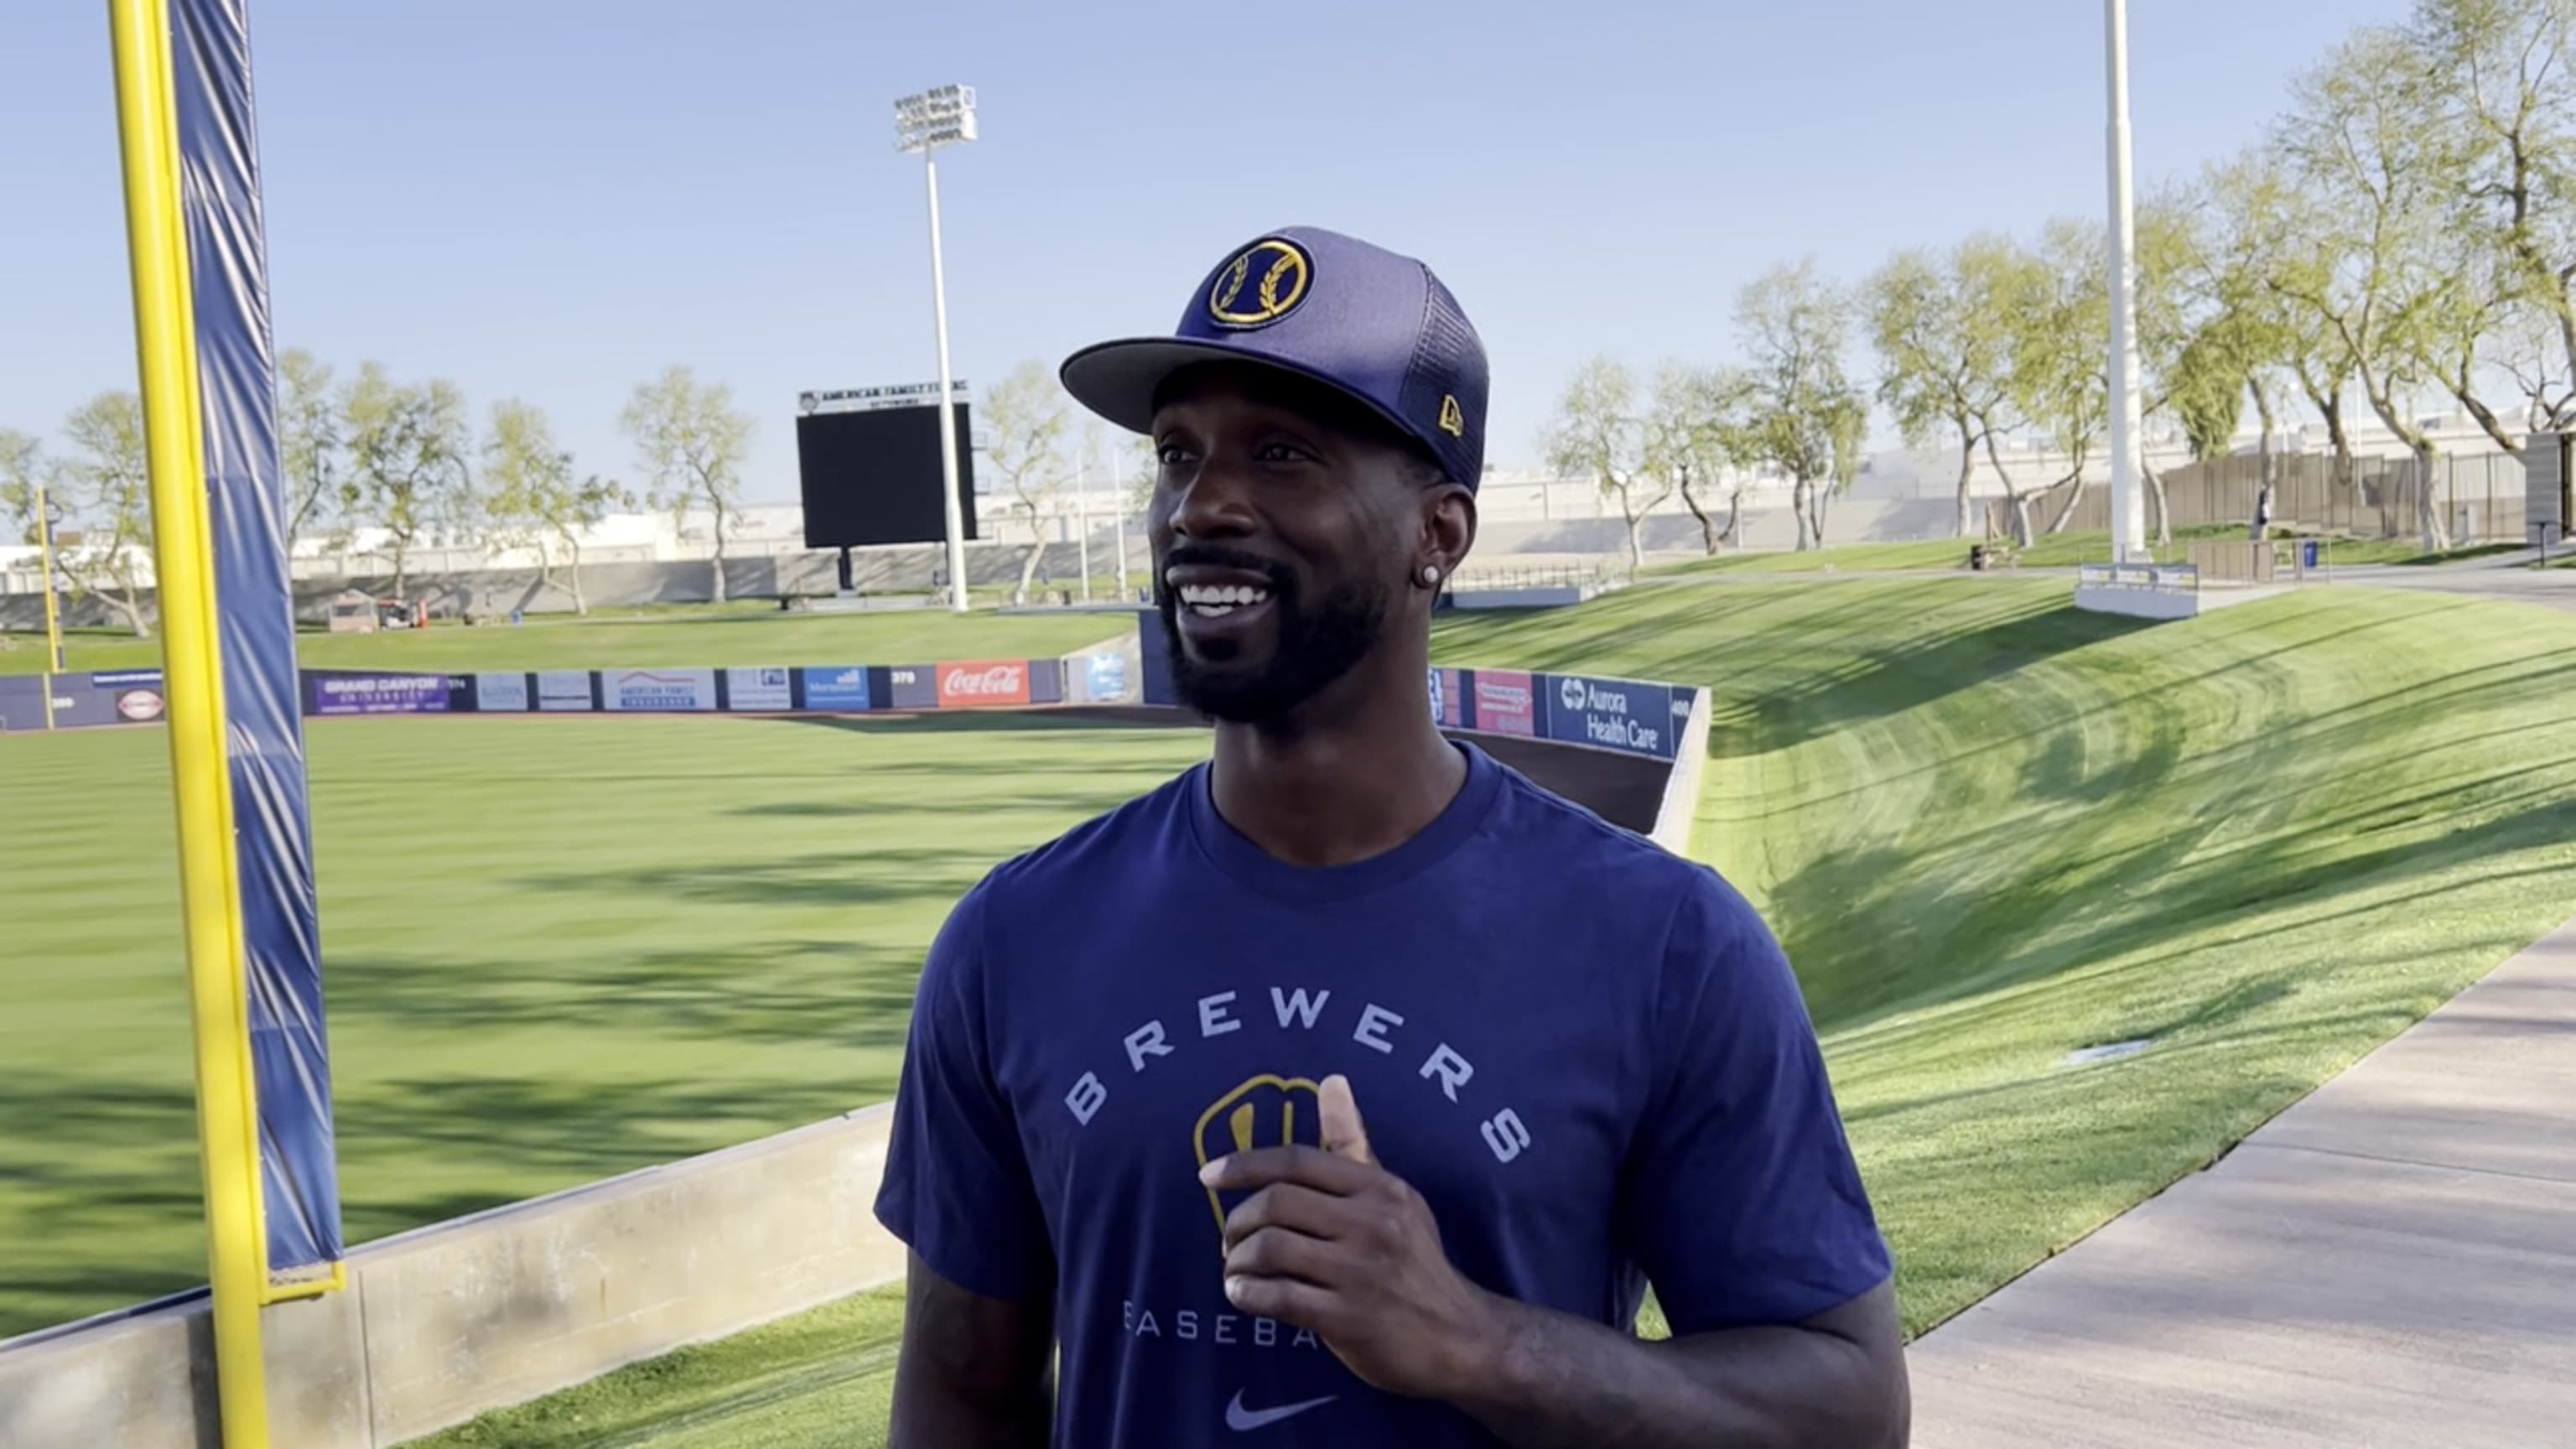 Lorenzo Cain won the Brewers' fantasy football league and now his teammates  have to hear about it - The Athletic